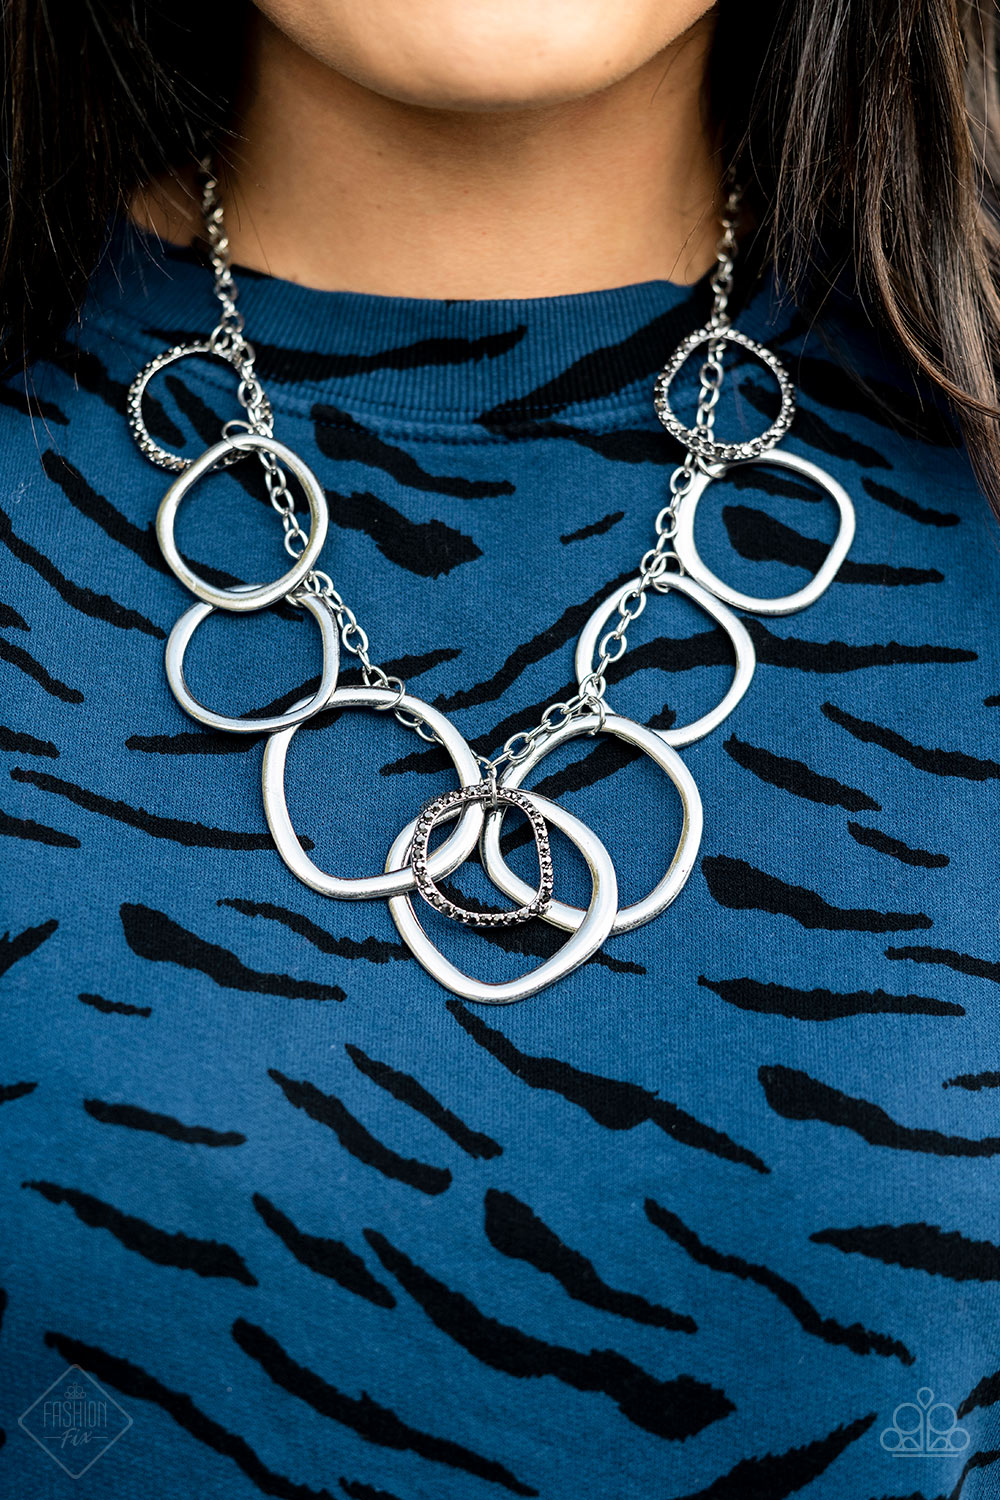 Dizzy With Desire - Silver Necklace Fashion Fix June 2021 Magnificient Musings 4085